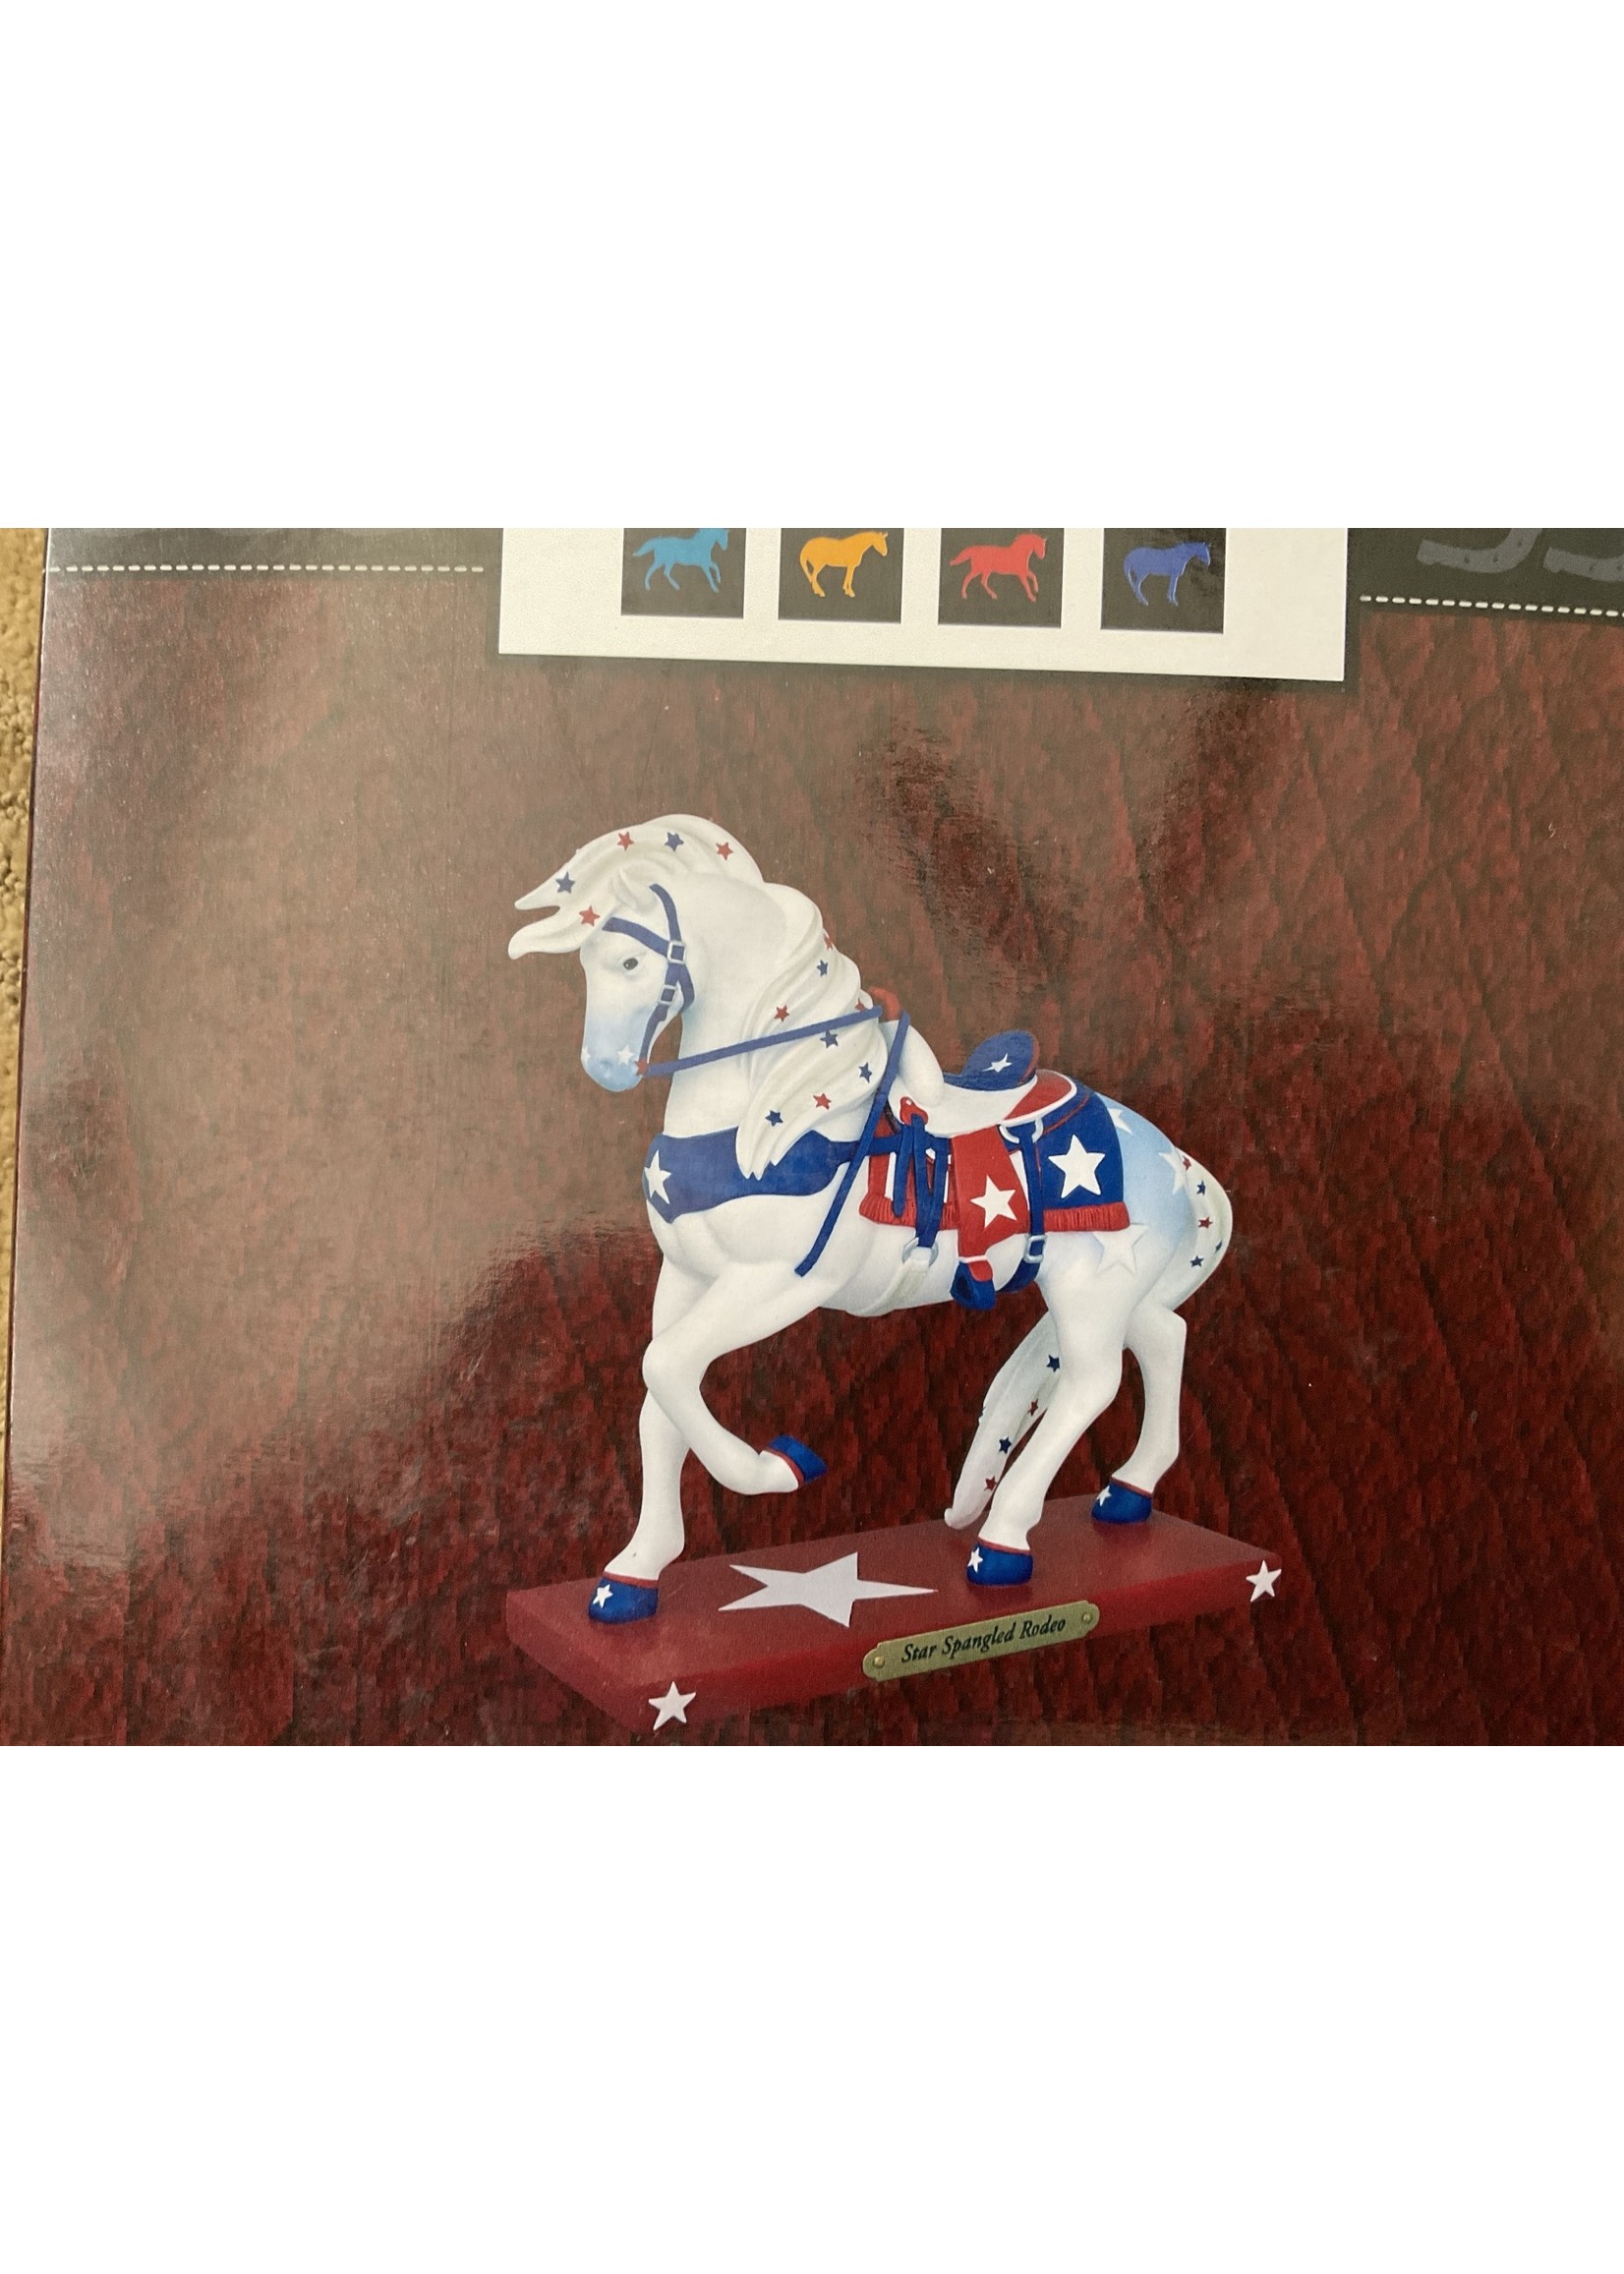 Trail of Painted Ponies TOPP 2015 Star Spangled Rodeo 4046344 1E 2819